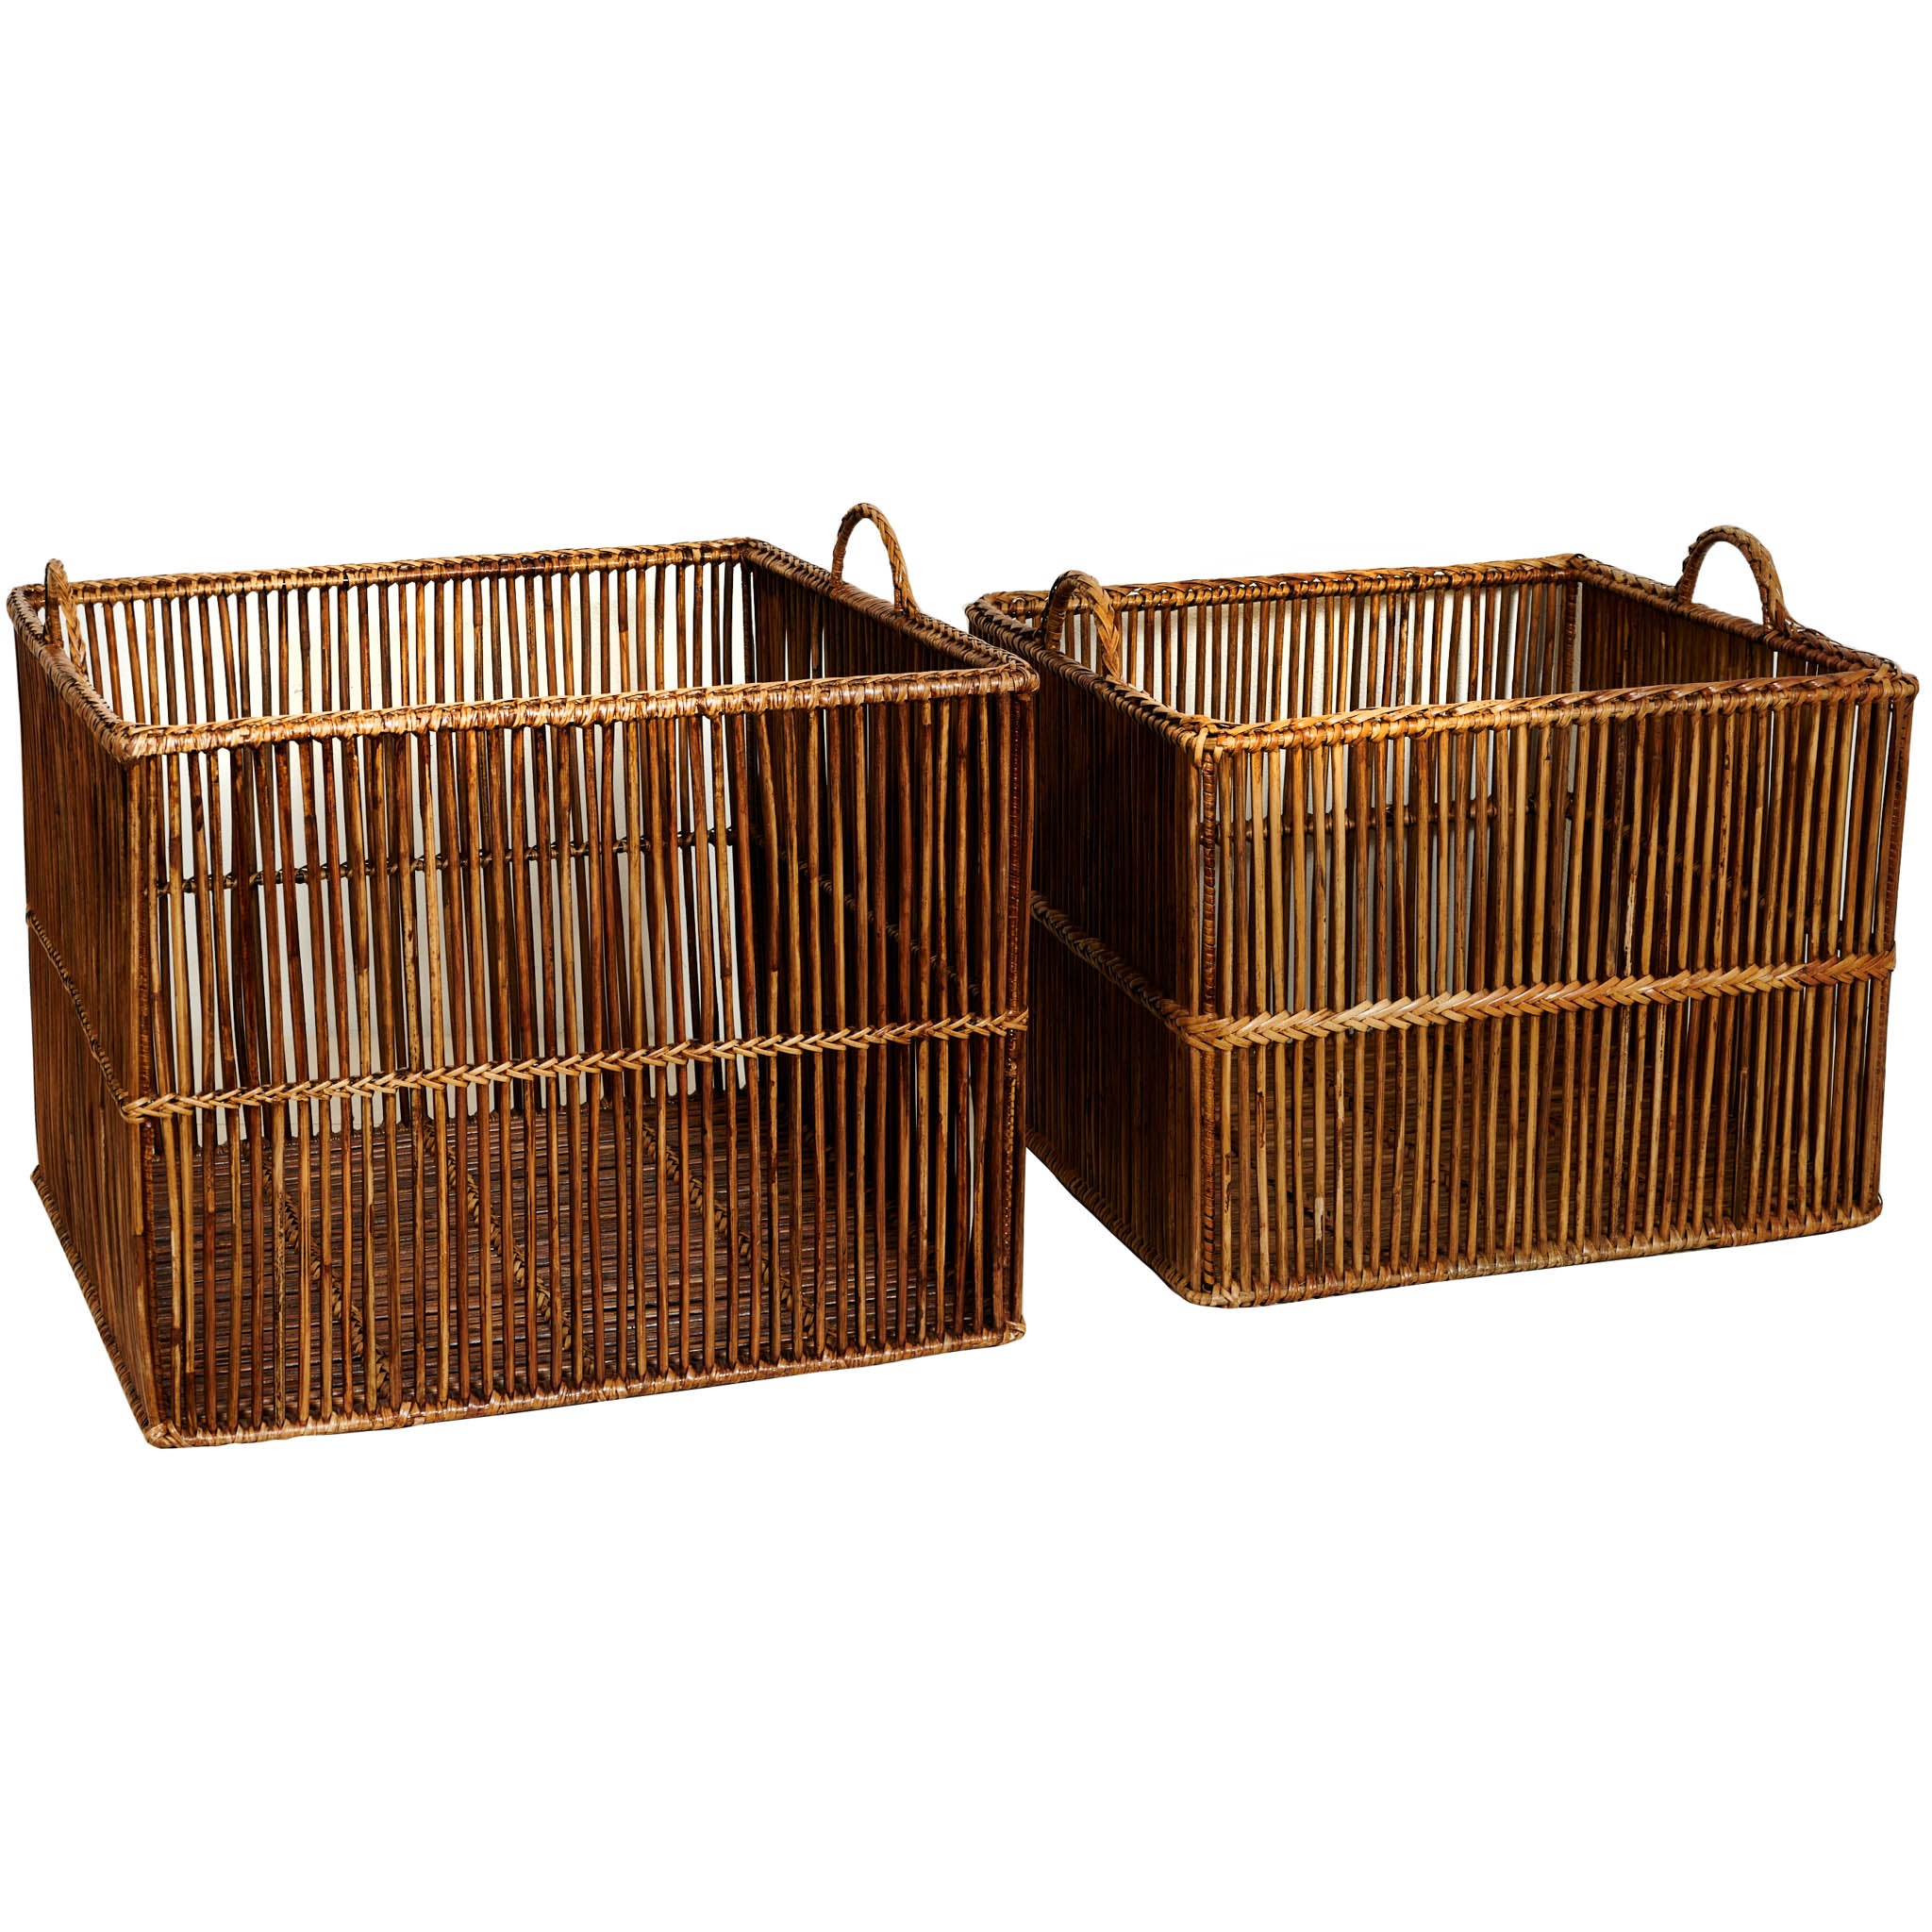 Set 2 Large Rain containers in natural rattan, dim. 55x55x50 and 50x50x45 cm